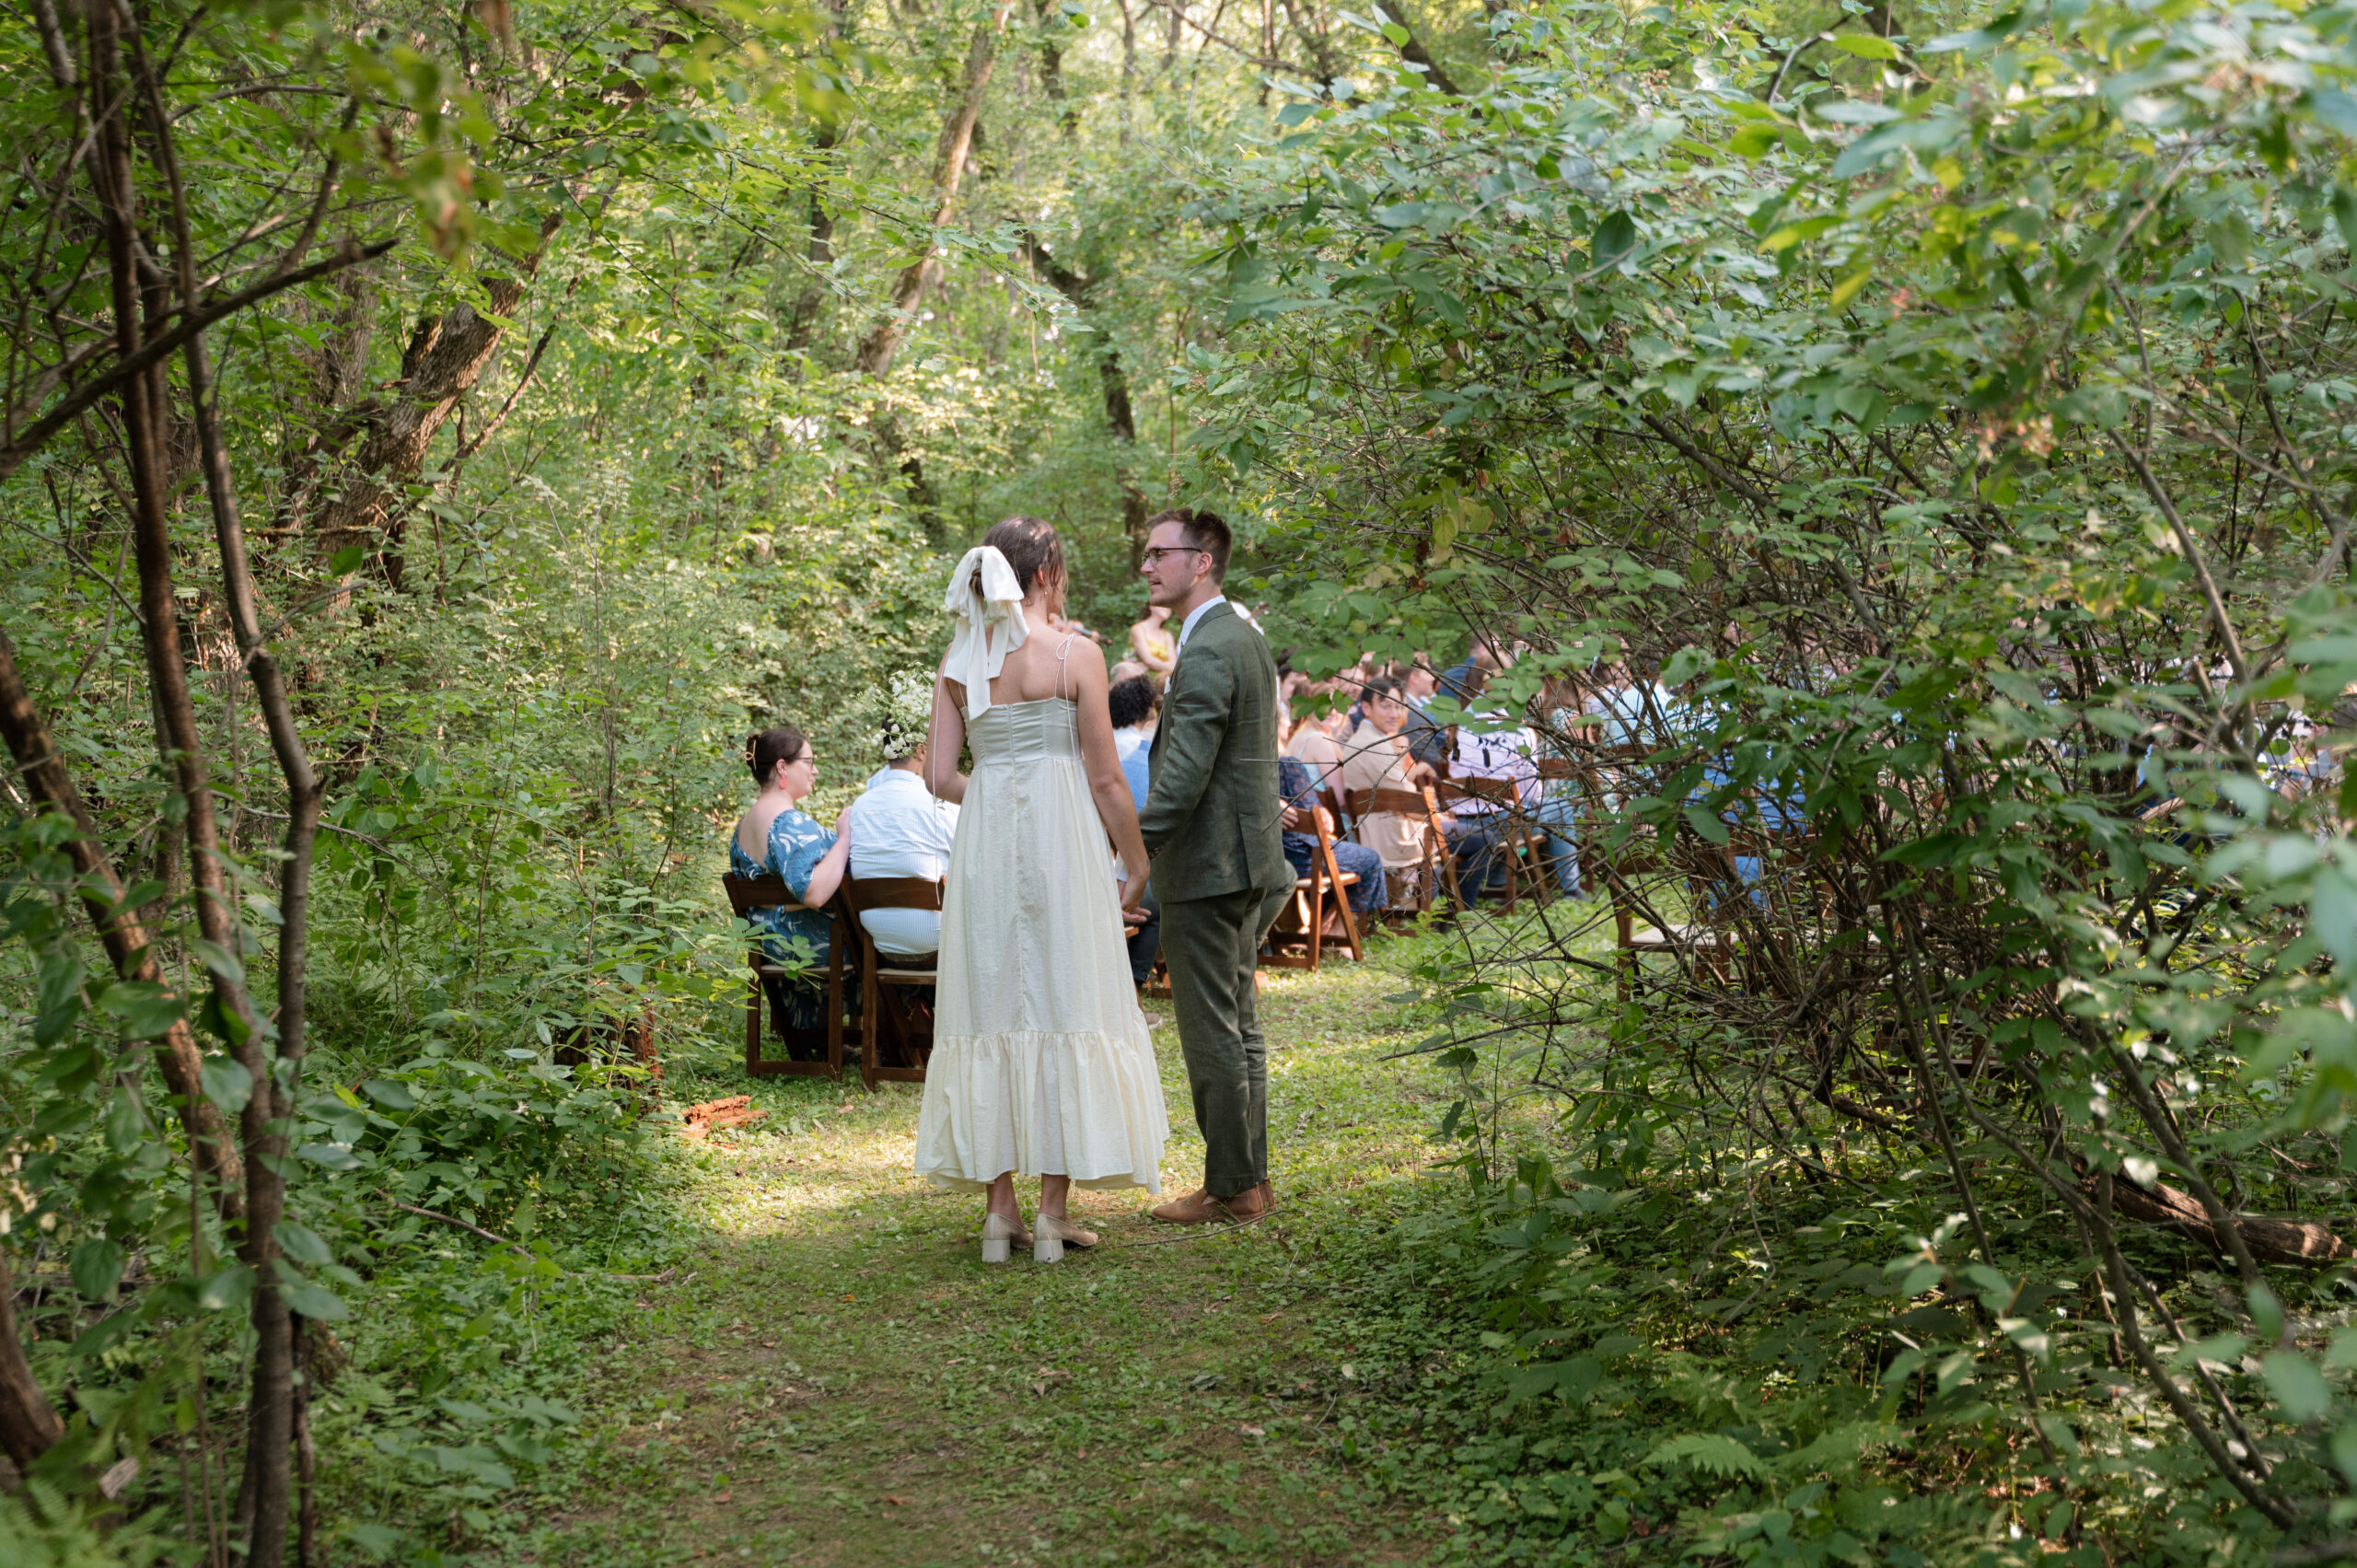 Couple waits for ceremony to start in Intimate Backyard Wedding